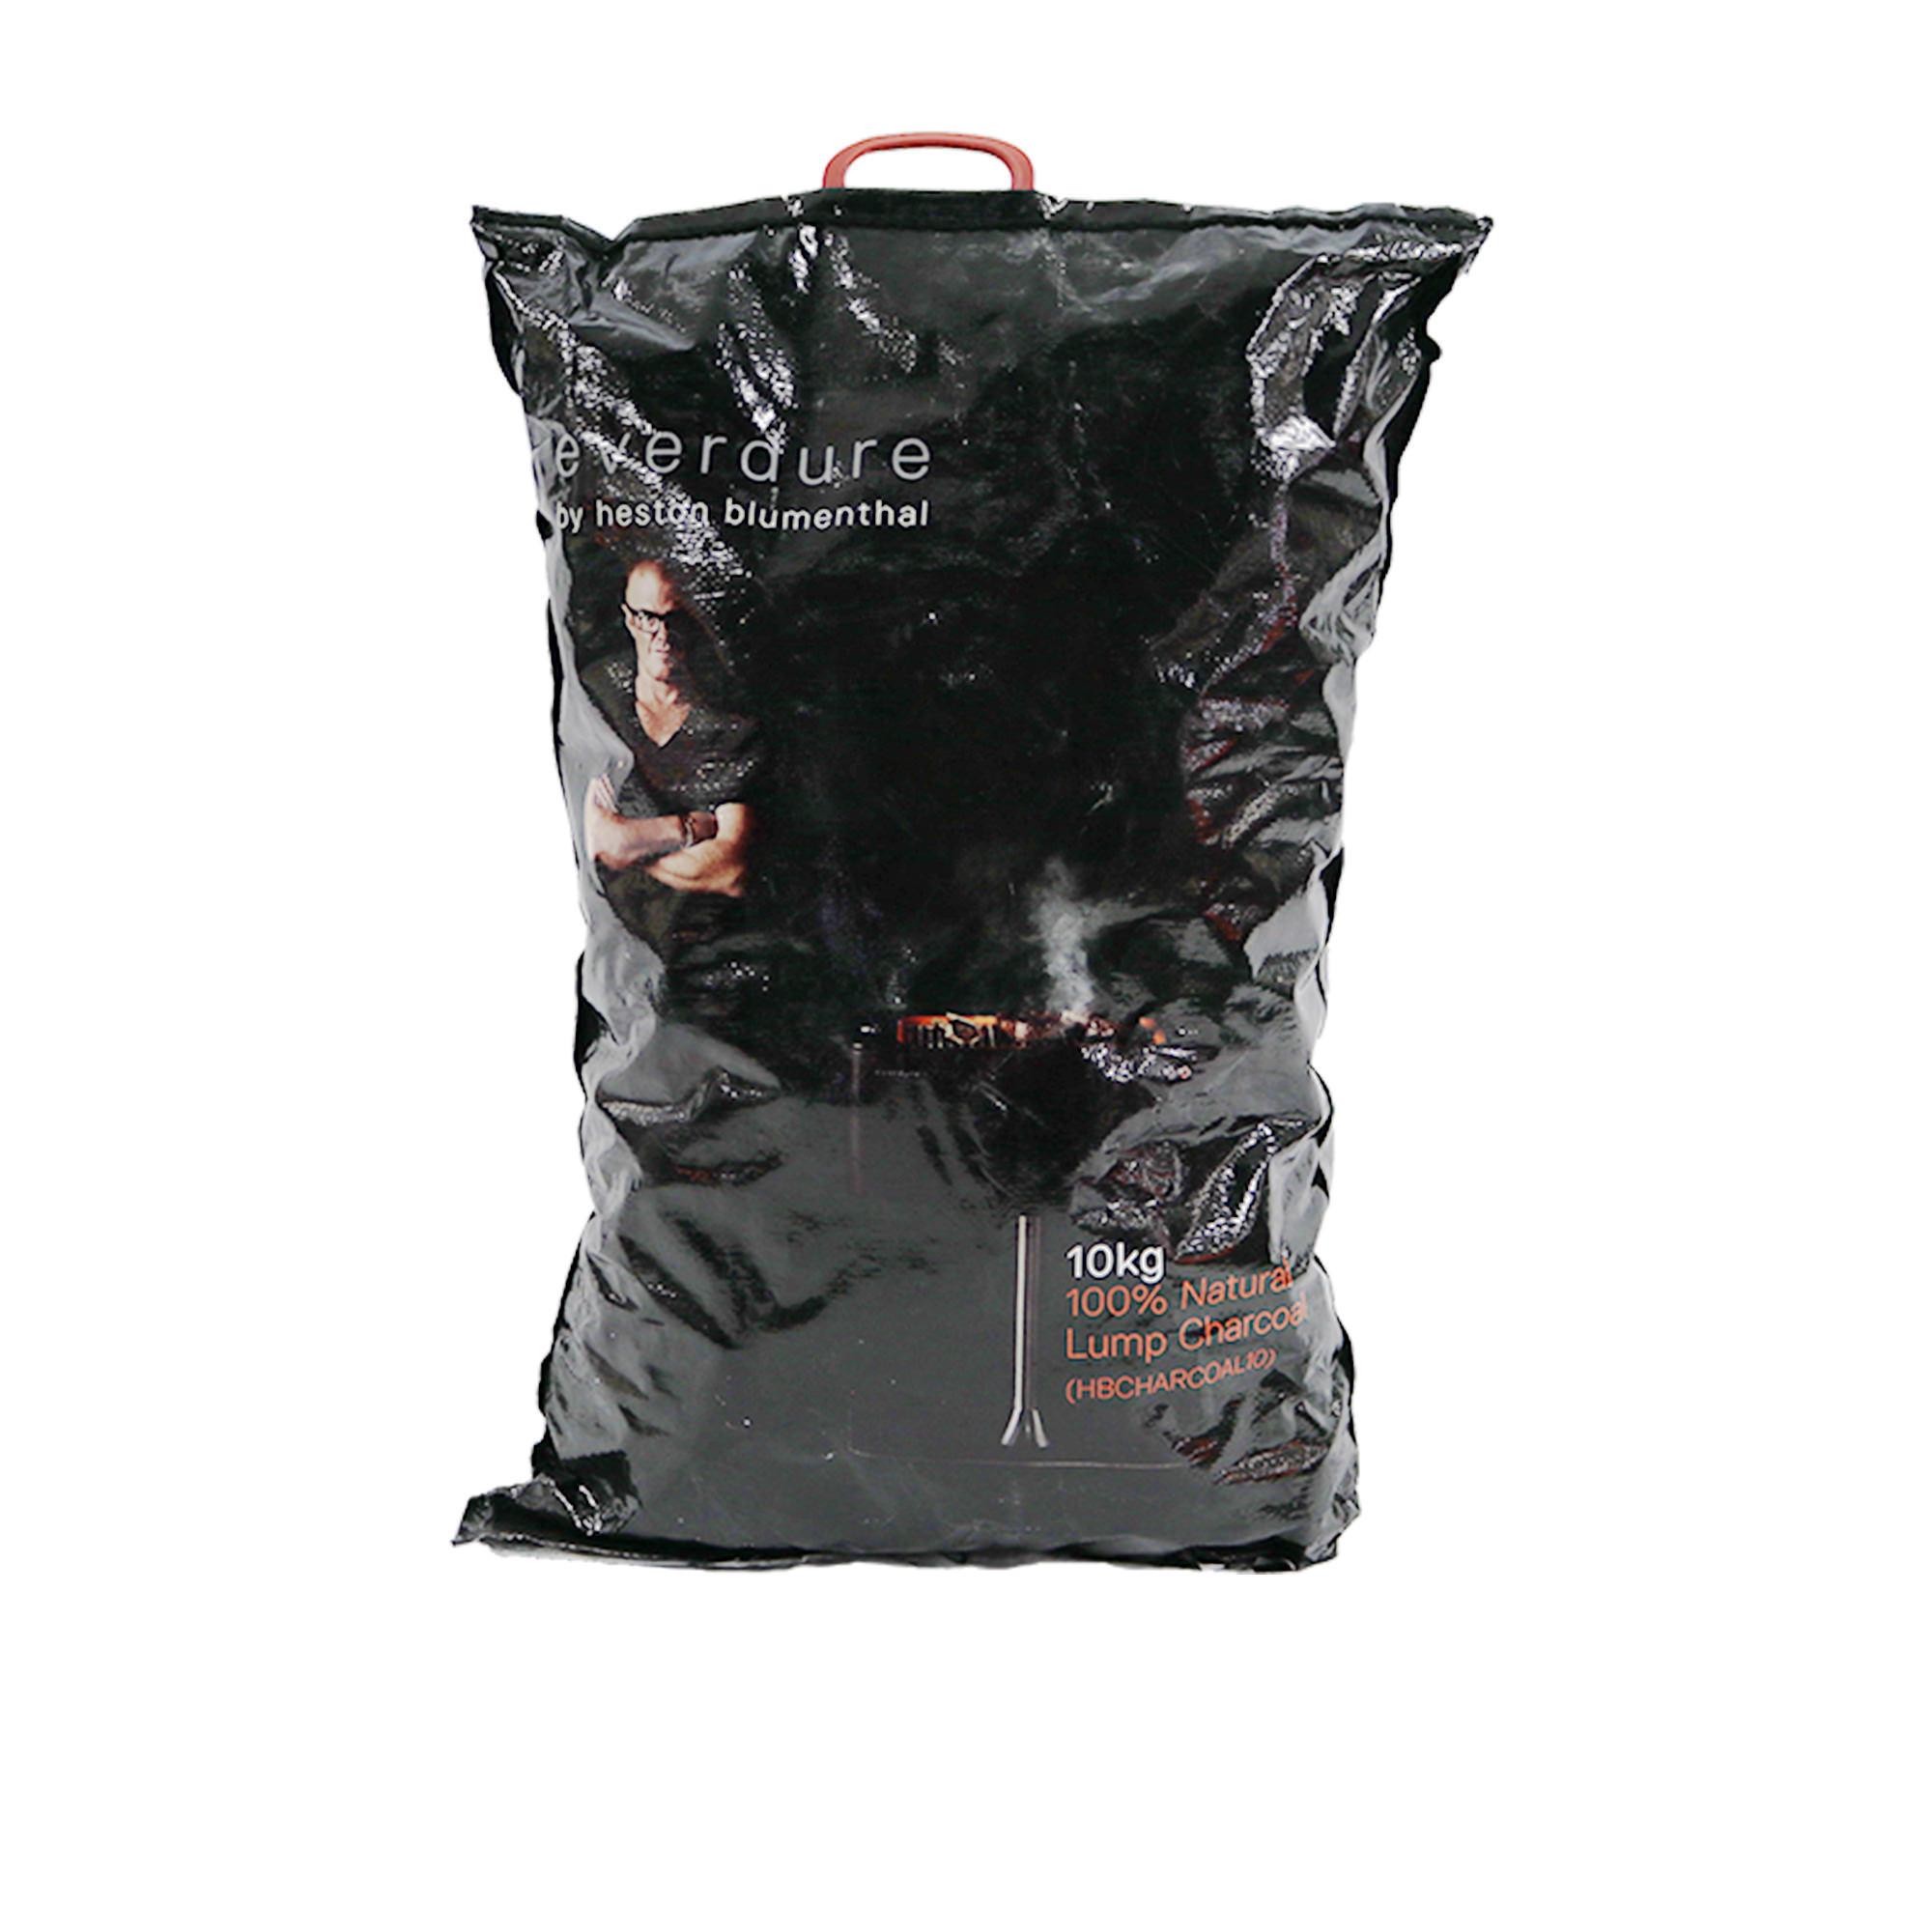 Everdure by Heston Blumenthal Natural Lump Charcoal 10kg Image 1